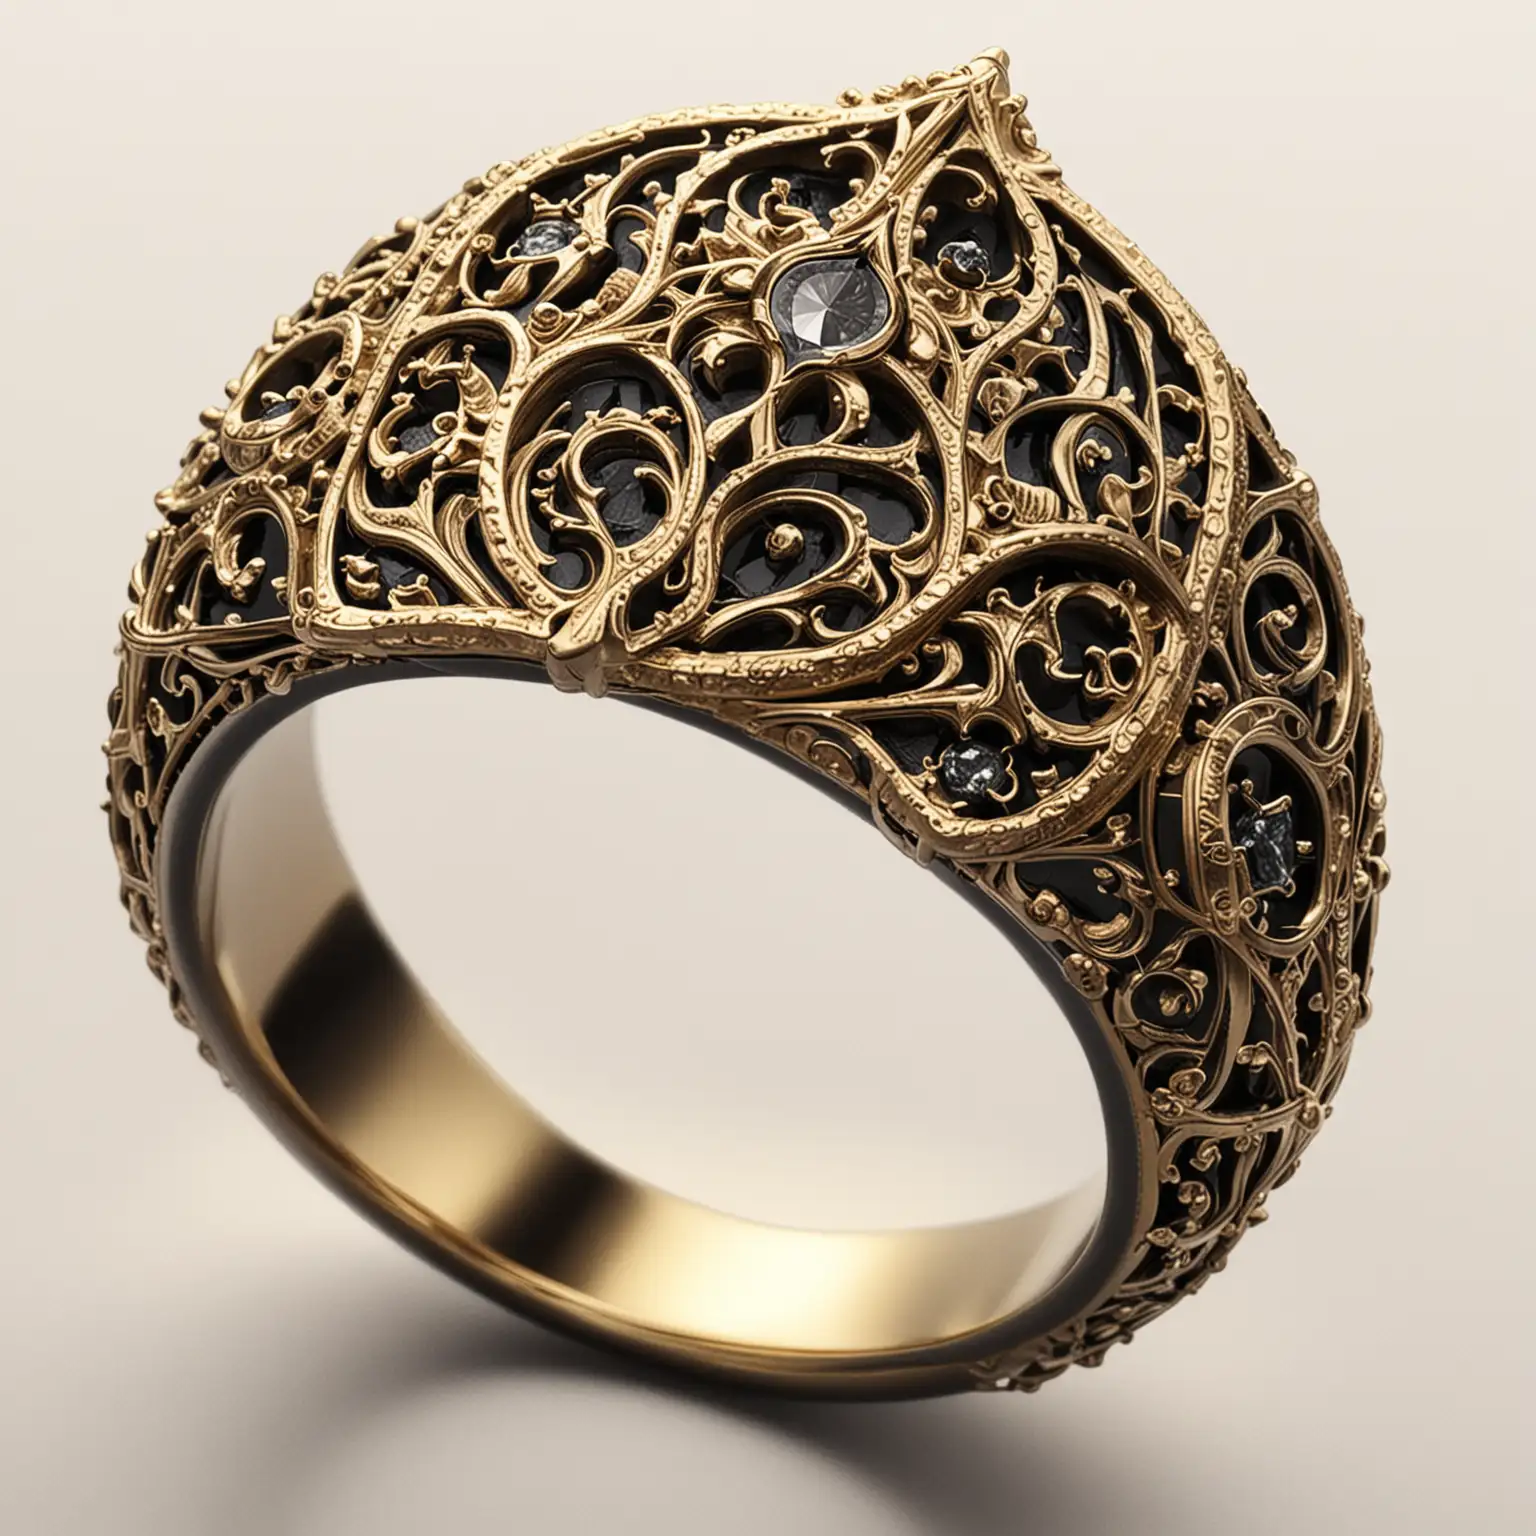 Gothic CathedralInspired Gold Ring Design